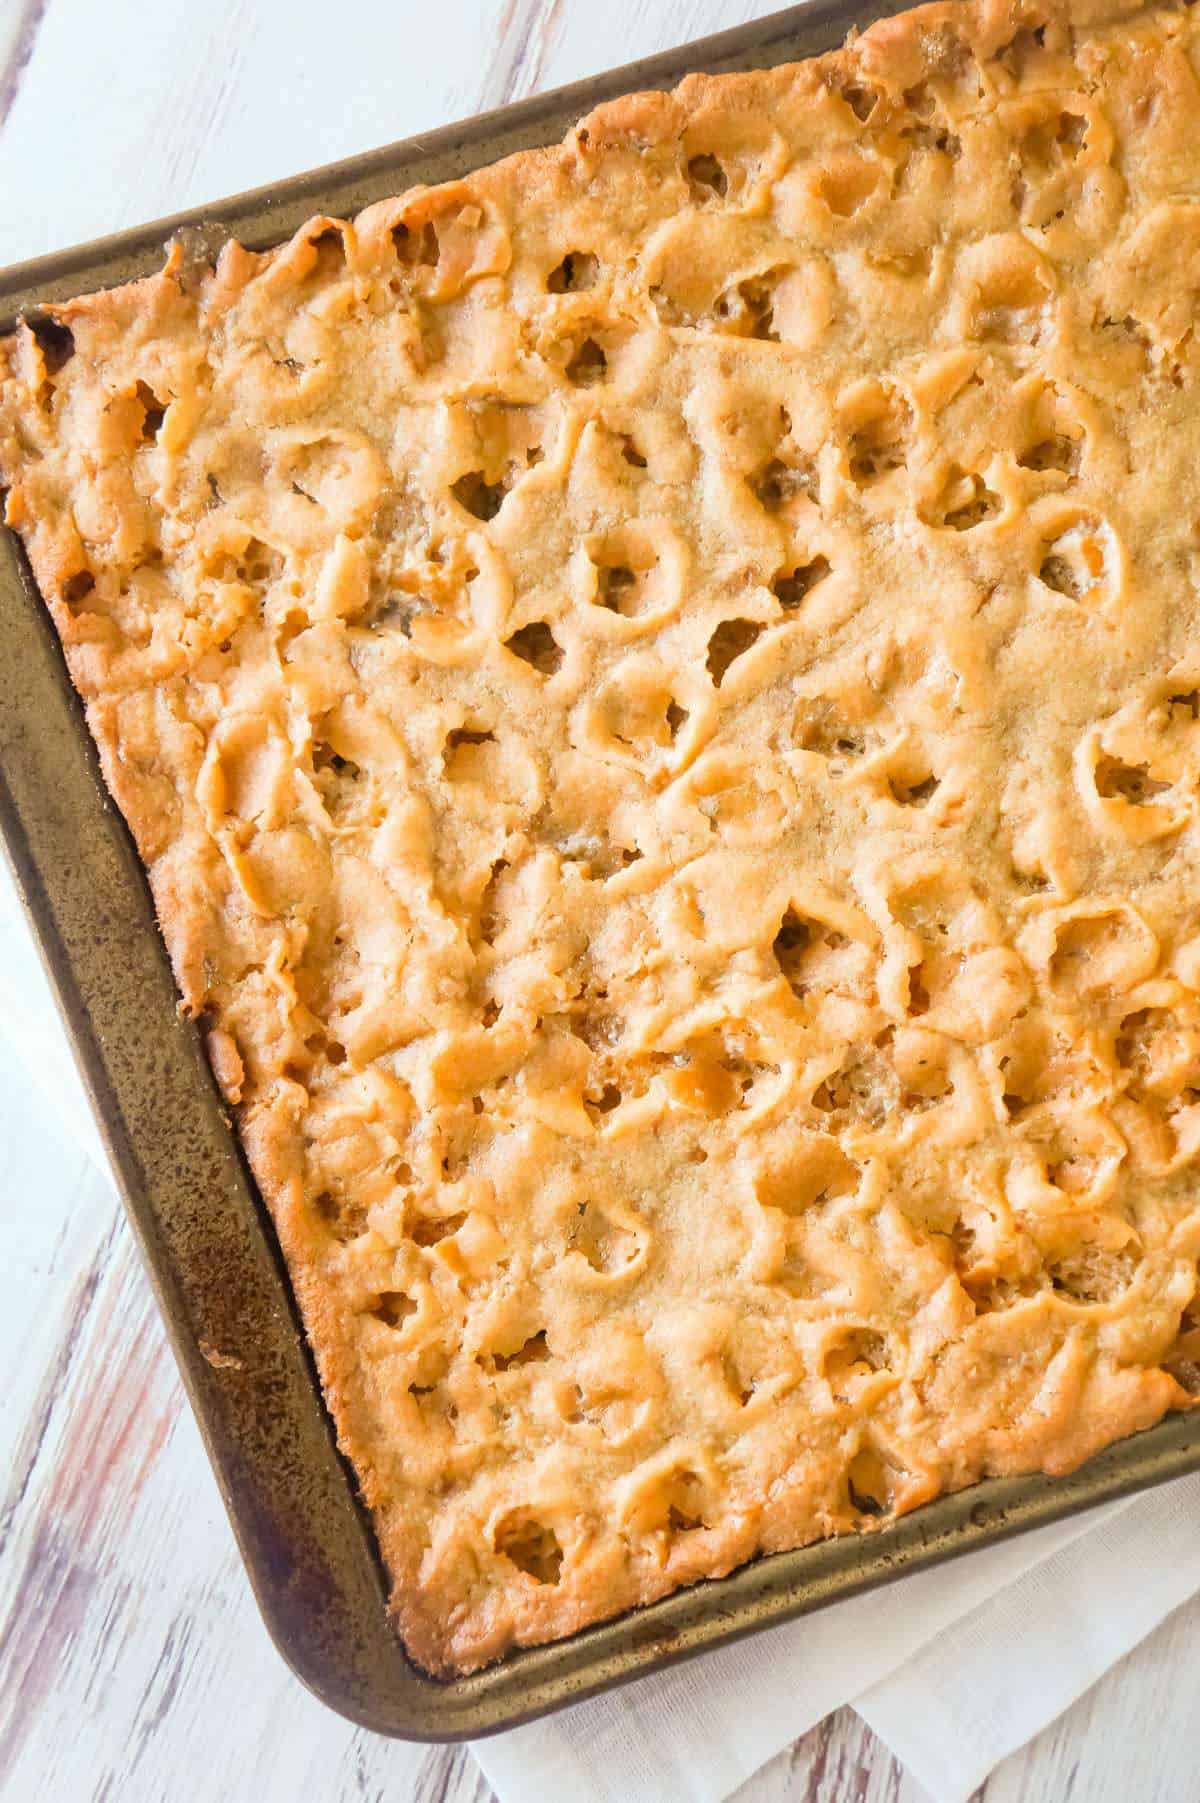 Peanut Butter Marshmallow Cookie Bars are soft and chewy peanut butter cookies loaded with mini marshmallows and toffee bits.